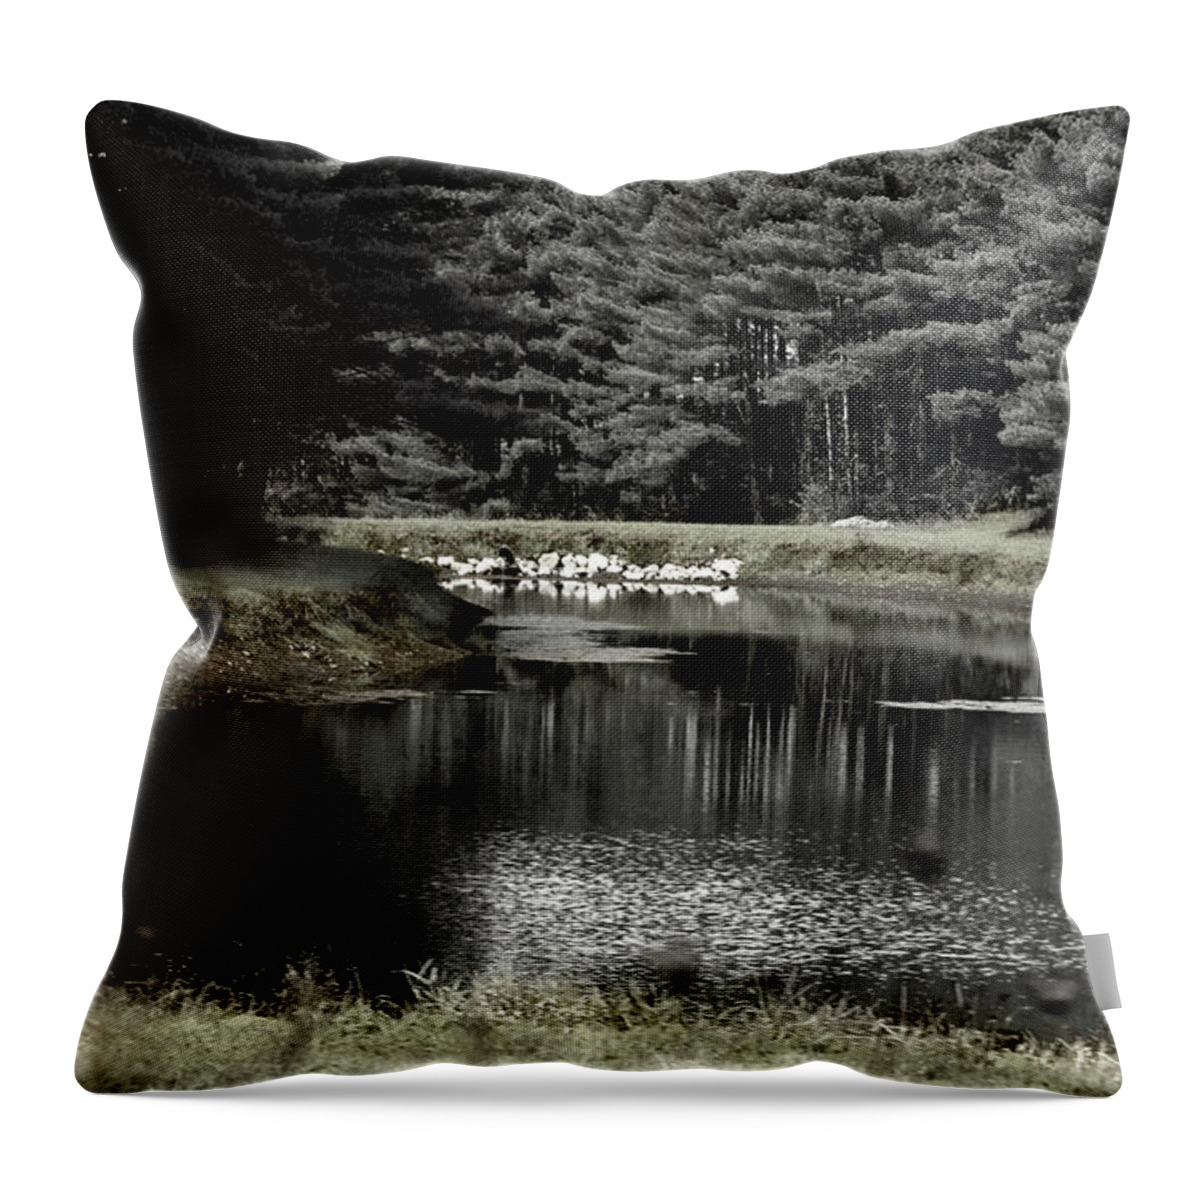 Pond Throw Pillow featuring the photograph A Pond by David Yocum